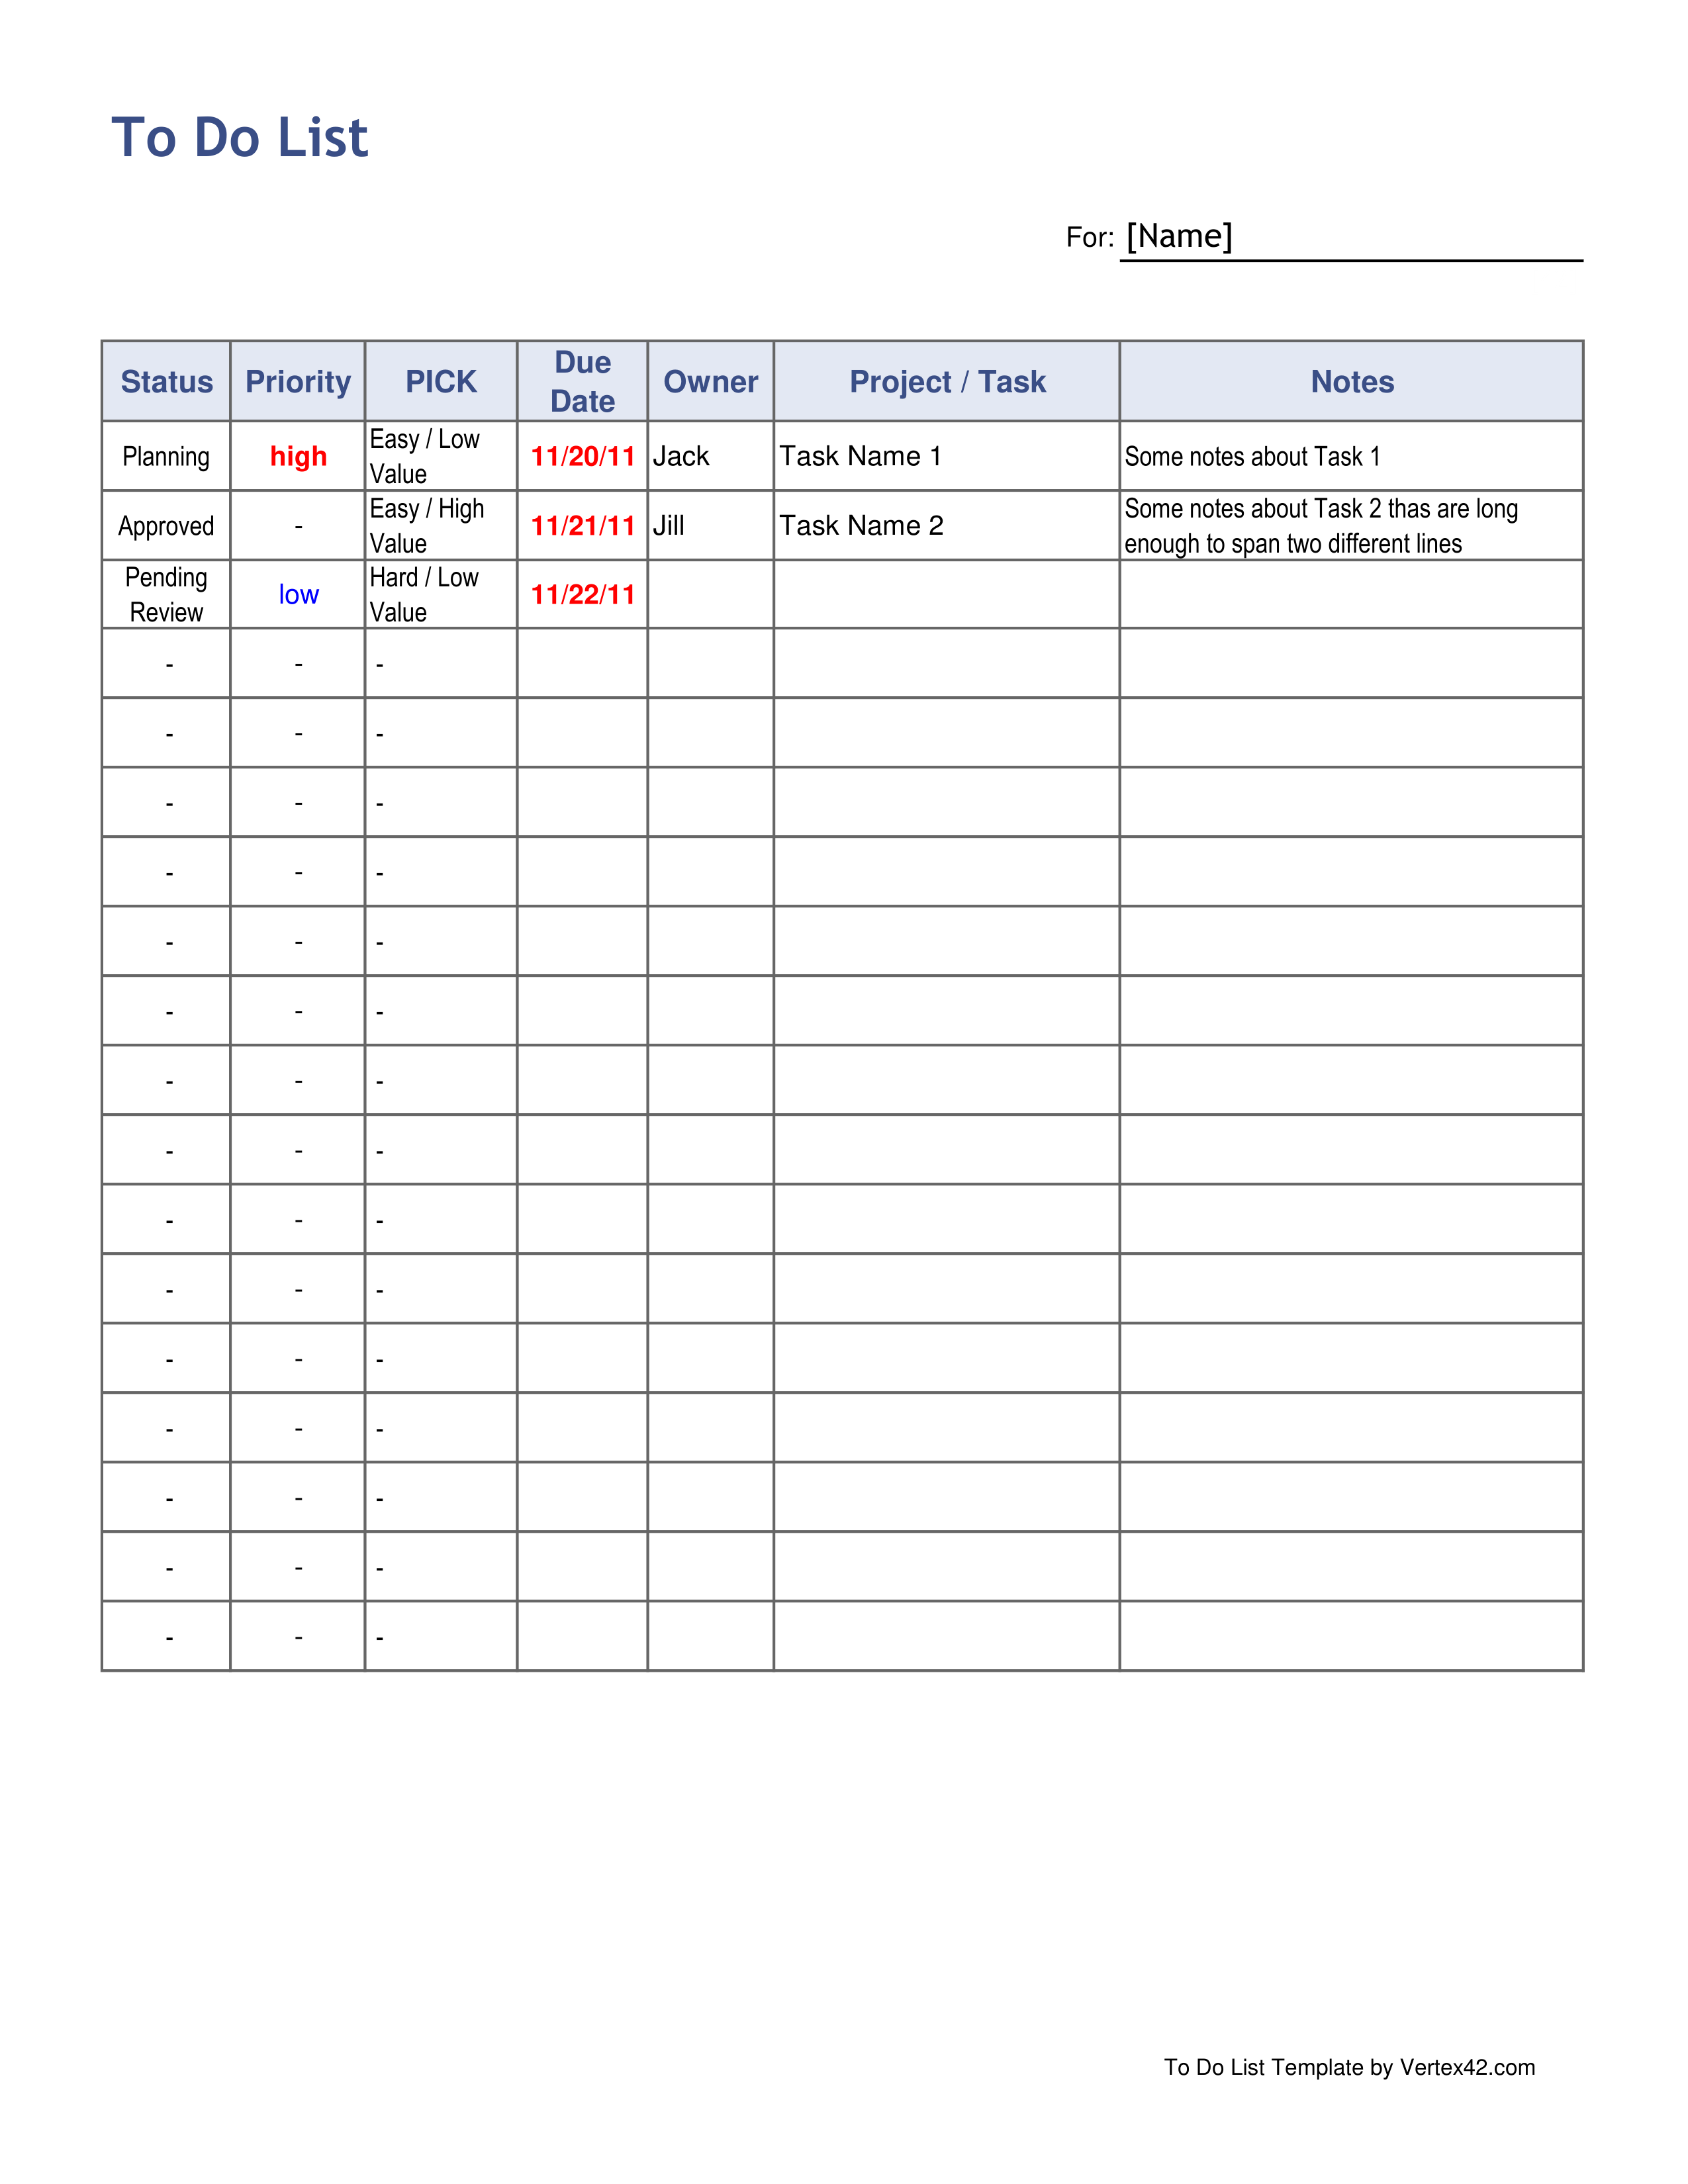 downloadable-to-do-list-template